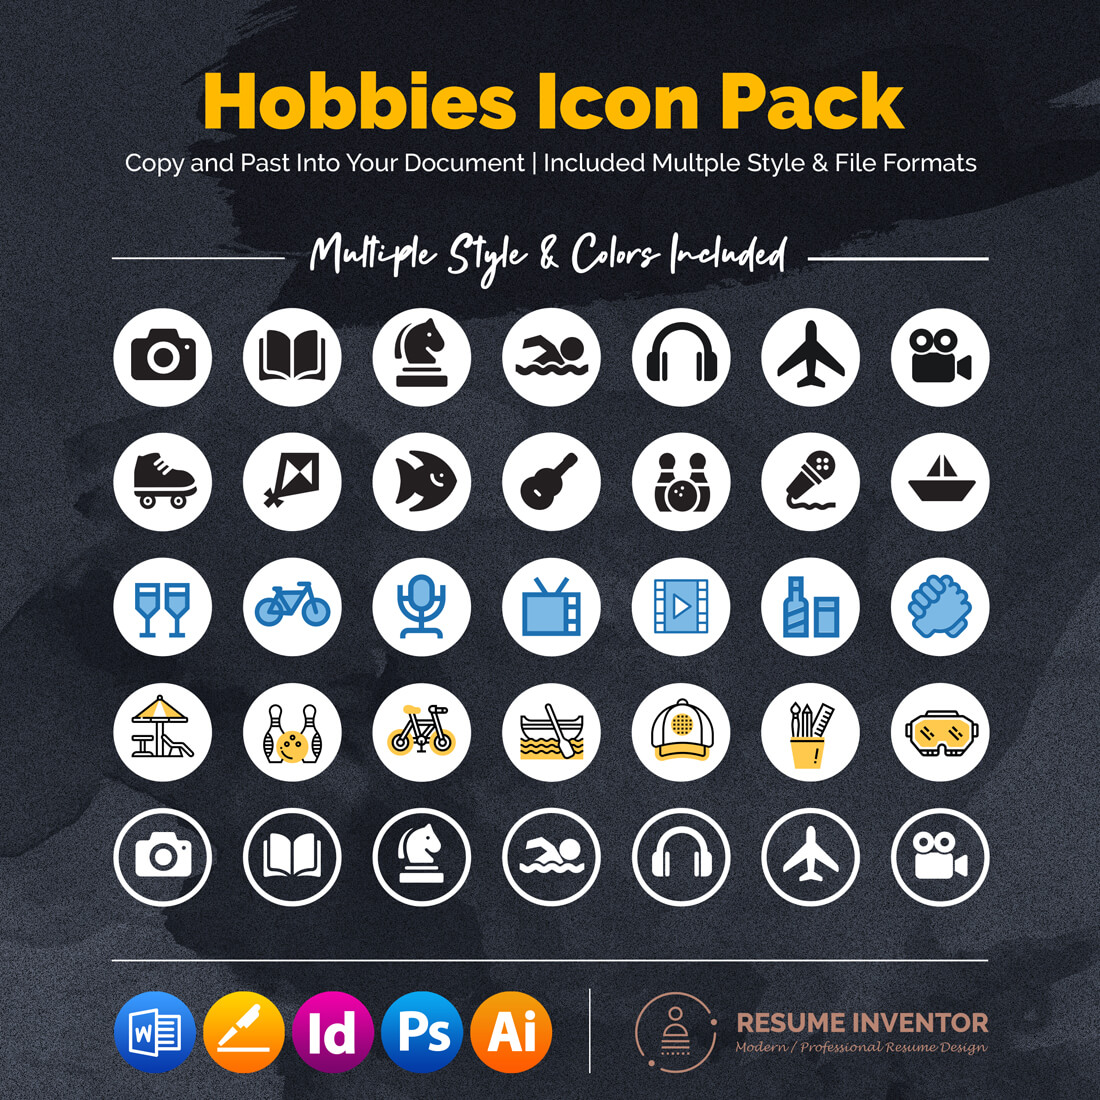 Large set of icons for a website.